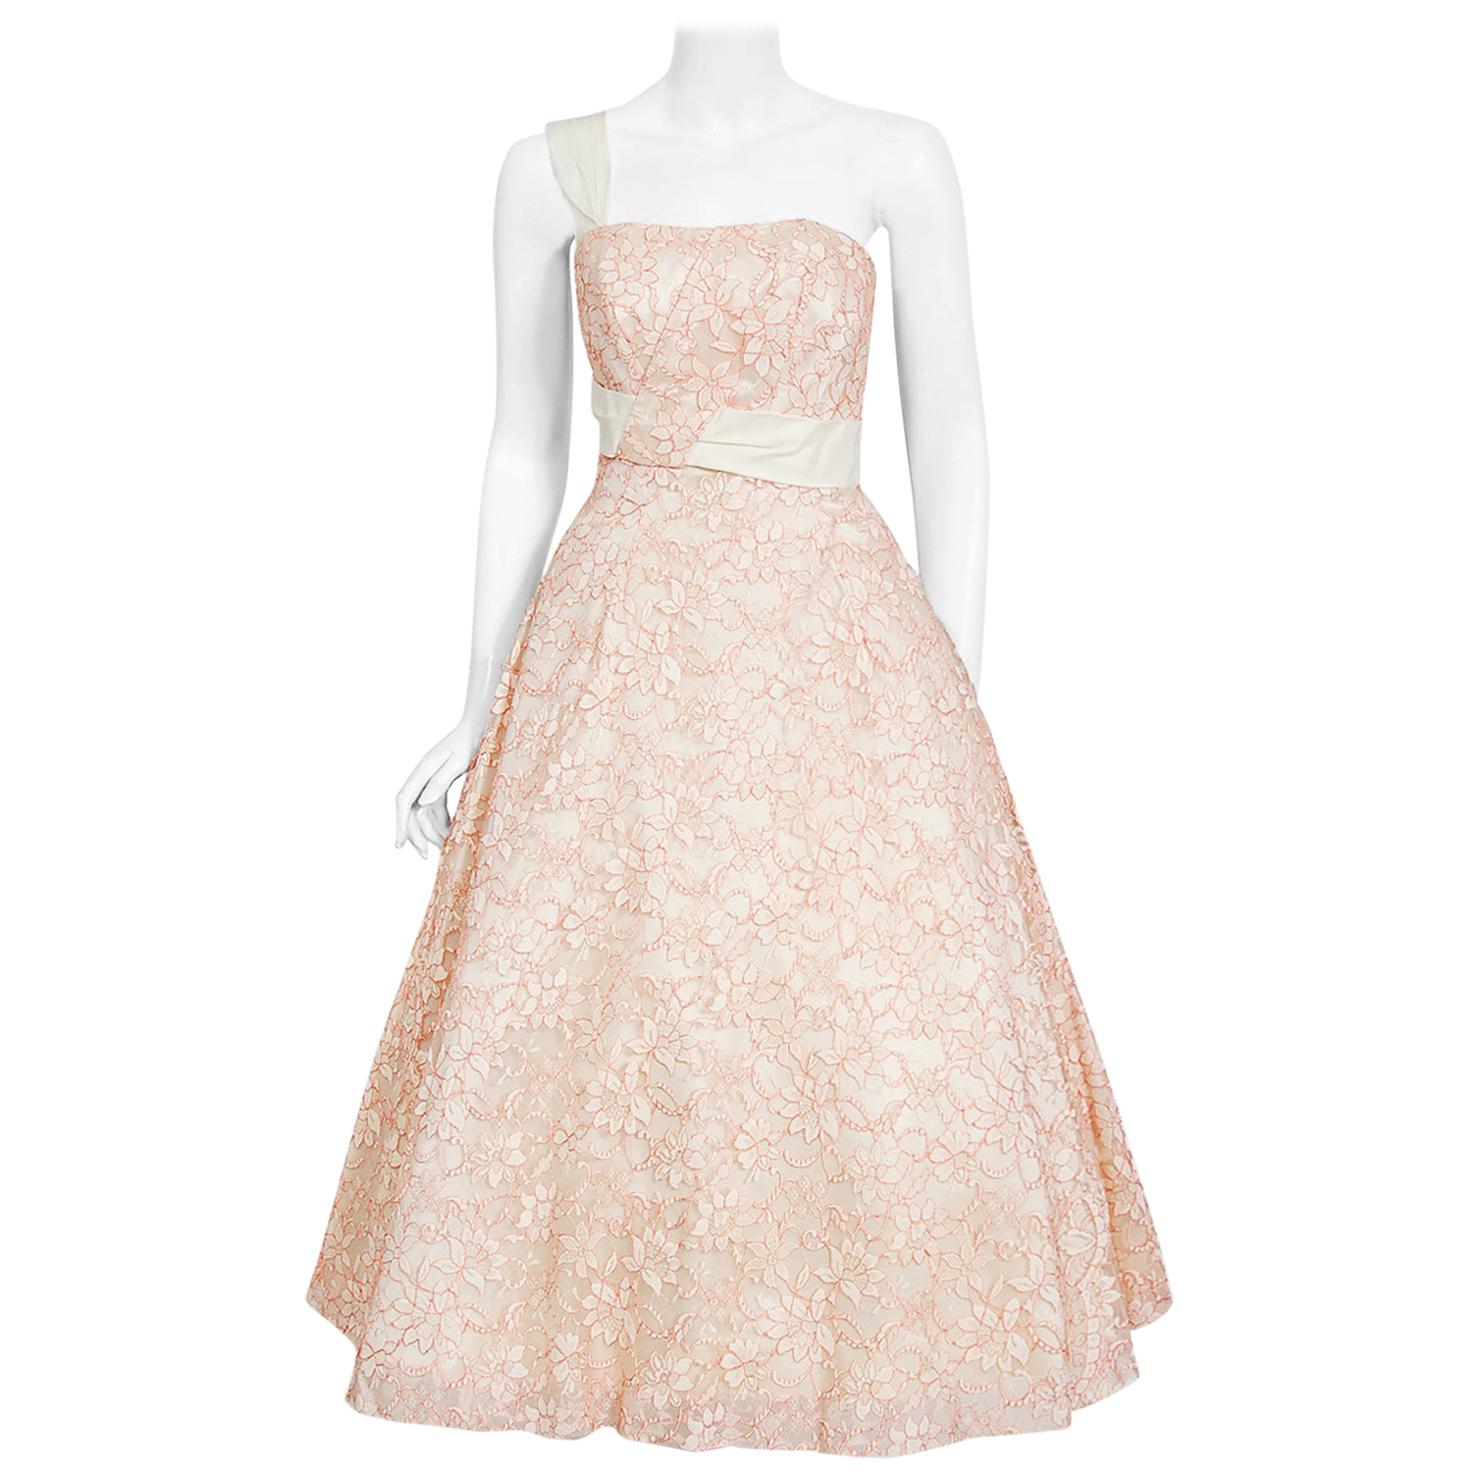 Vintage 1950's Jacques Heim Haute Couture Pink and White Lace One-Shoulder Dress